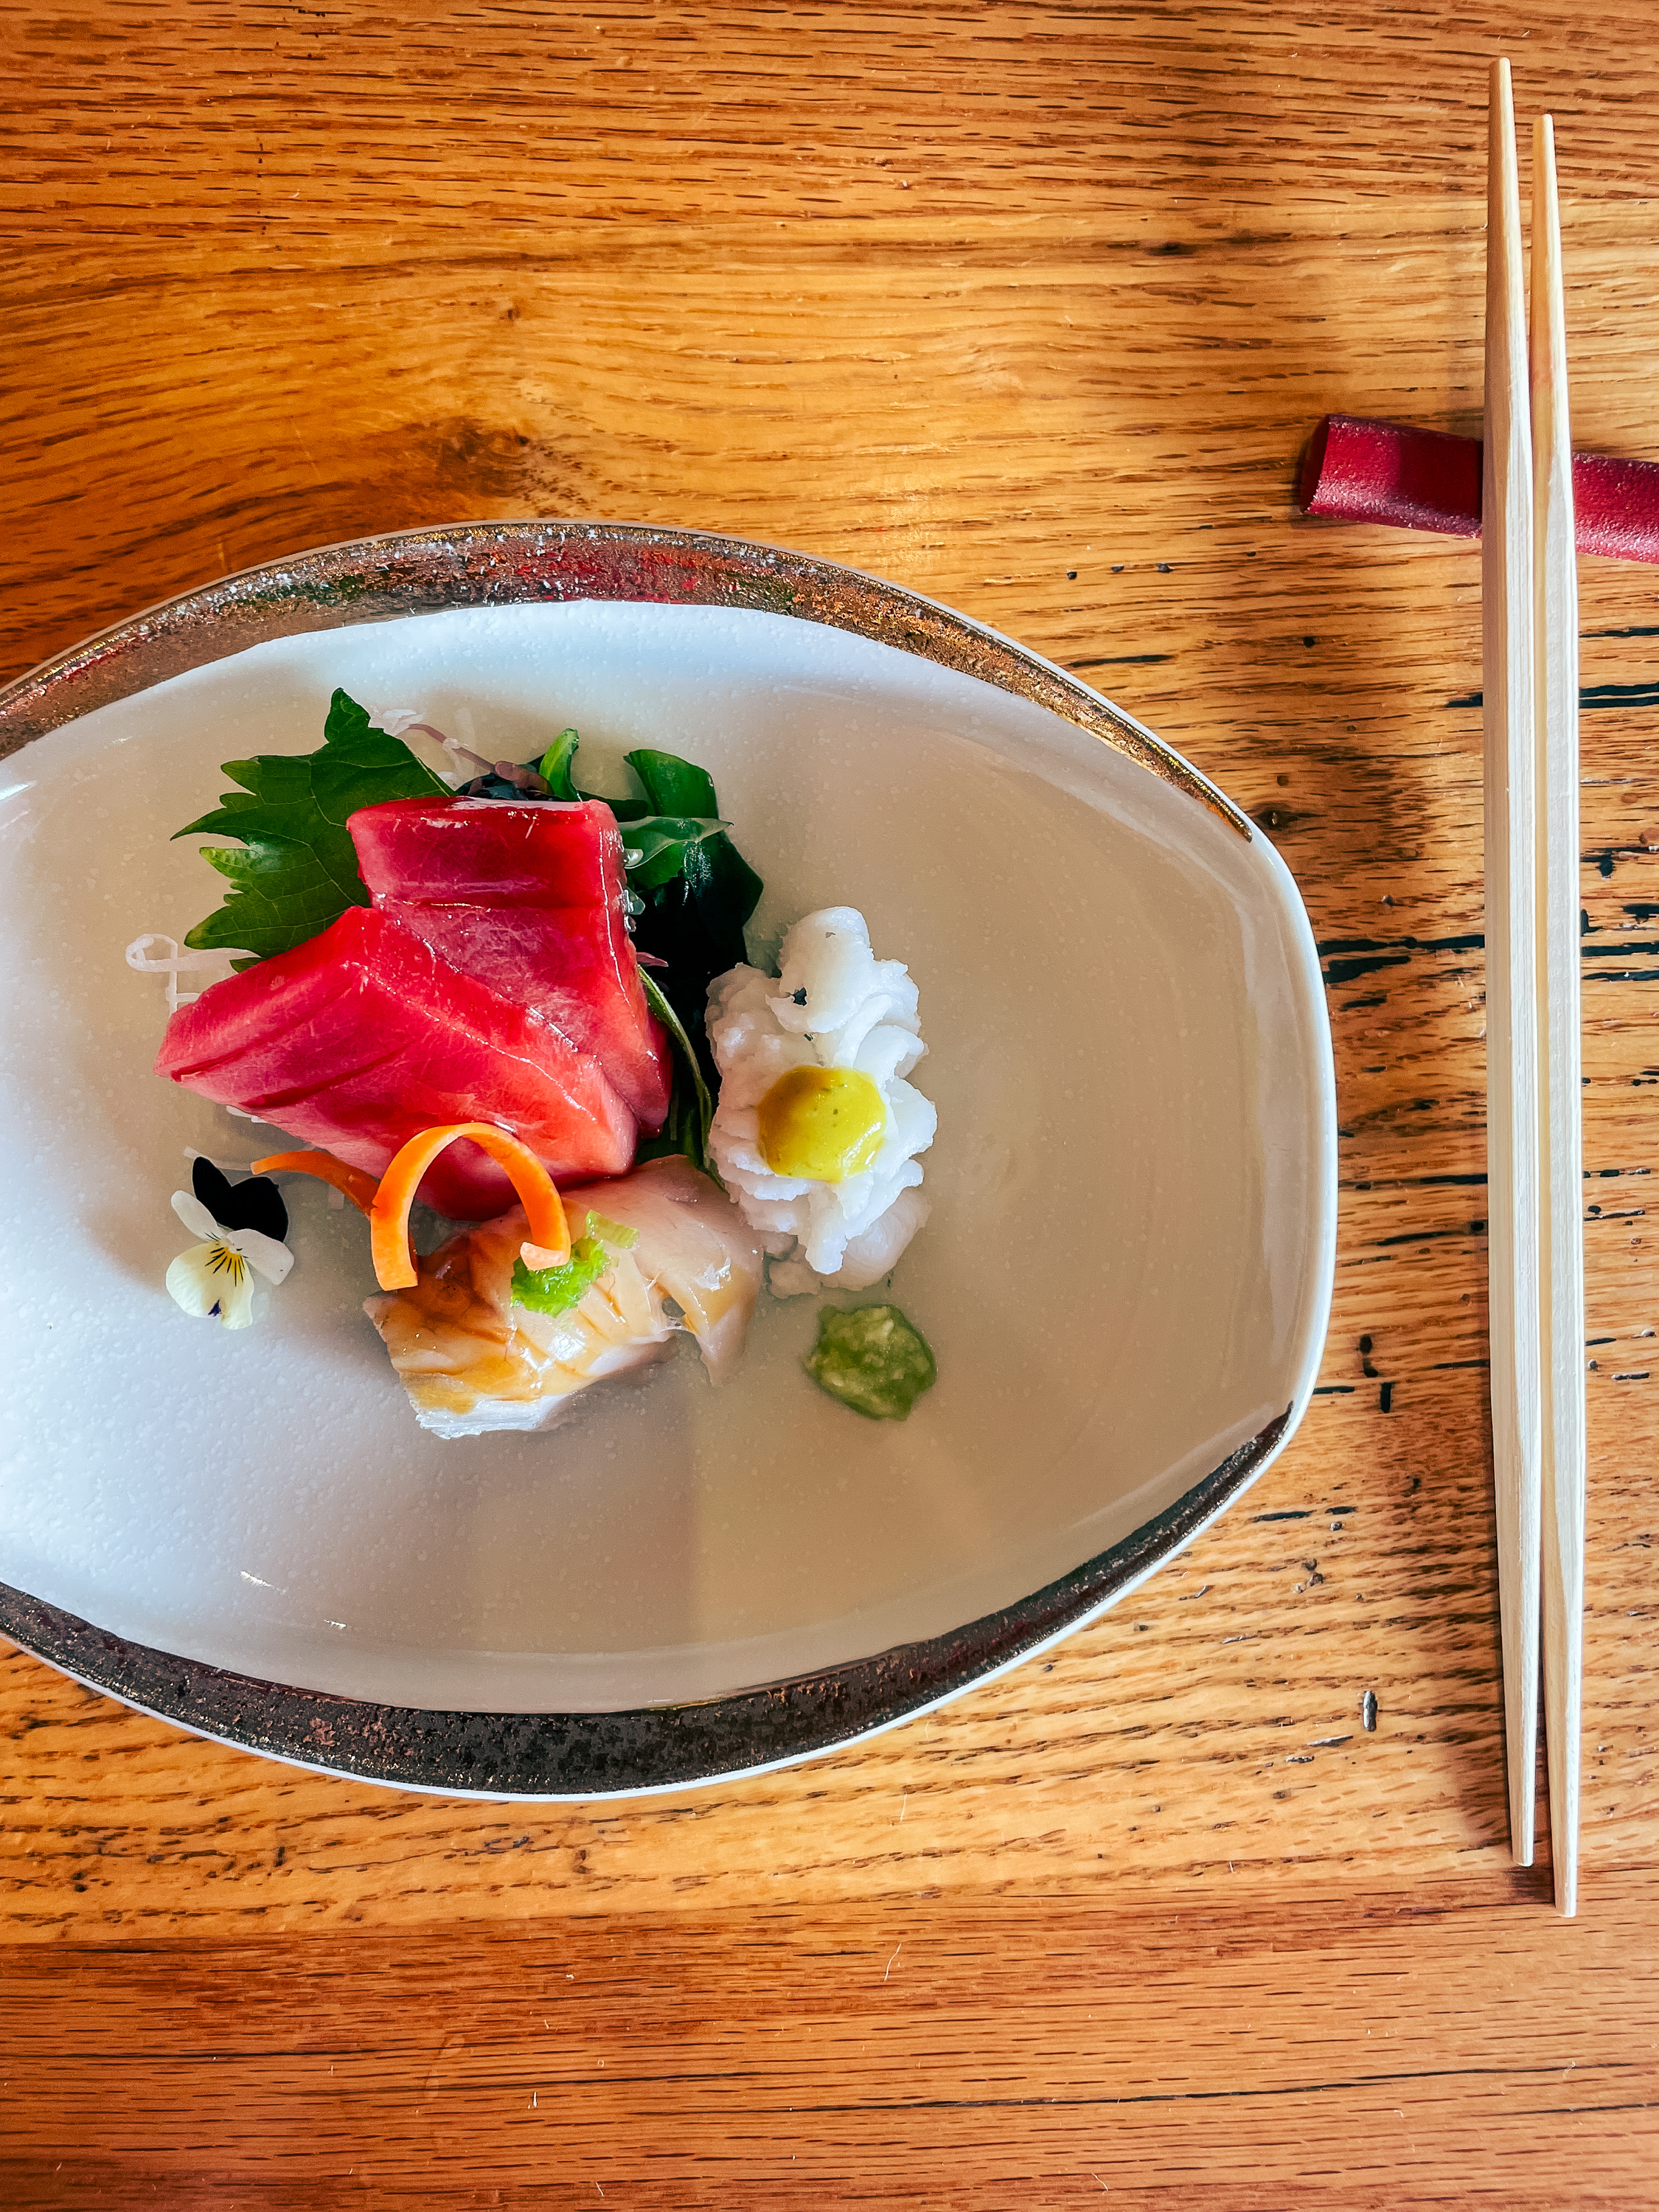 The image shows a beautifully plated dish of sashimi, including tuna, white fish, and squid, garnished with a yellow dollop, a green paste, a small flower, and decorative vegetables. It is presented on an oval-shaped plate next to a pair of chopsticks on a wooden table.